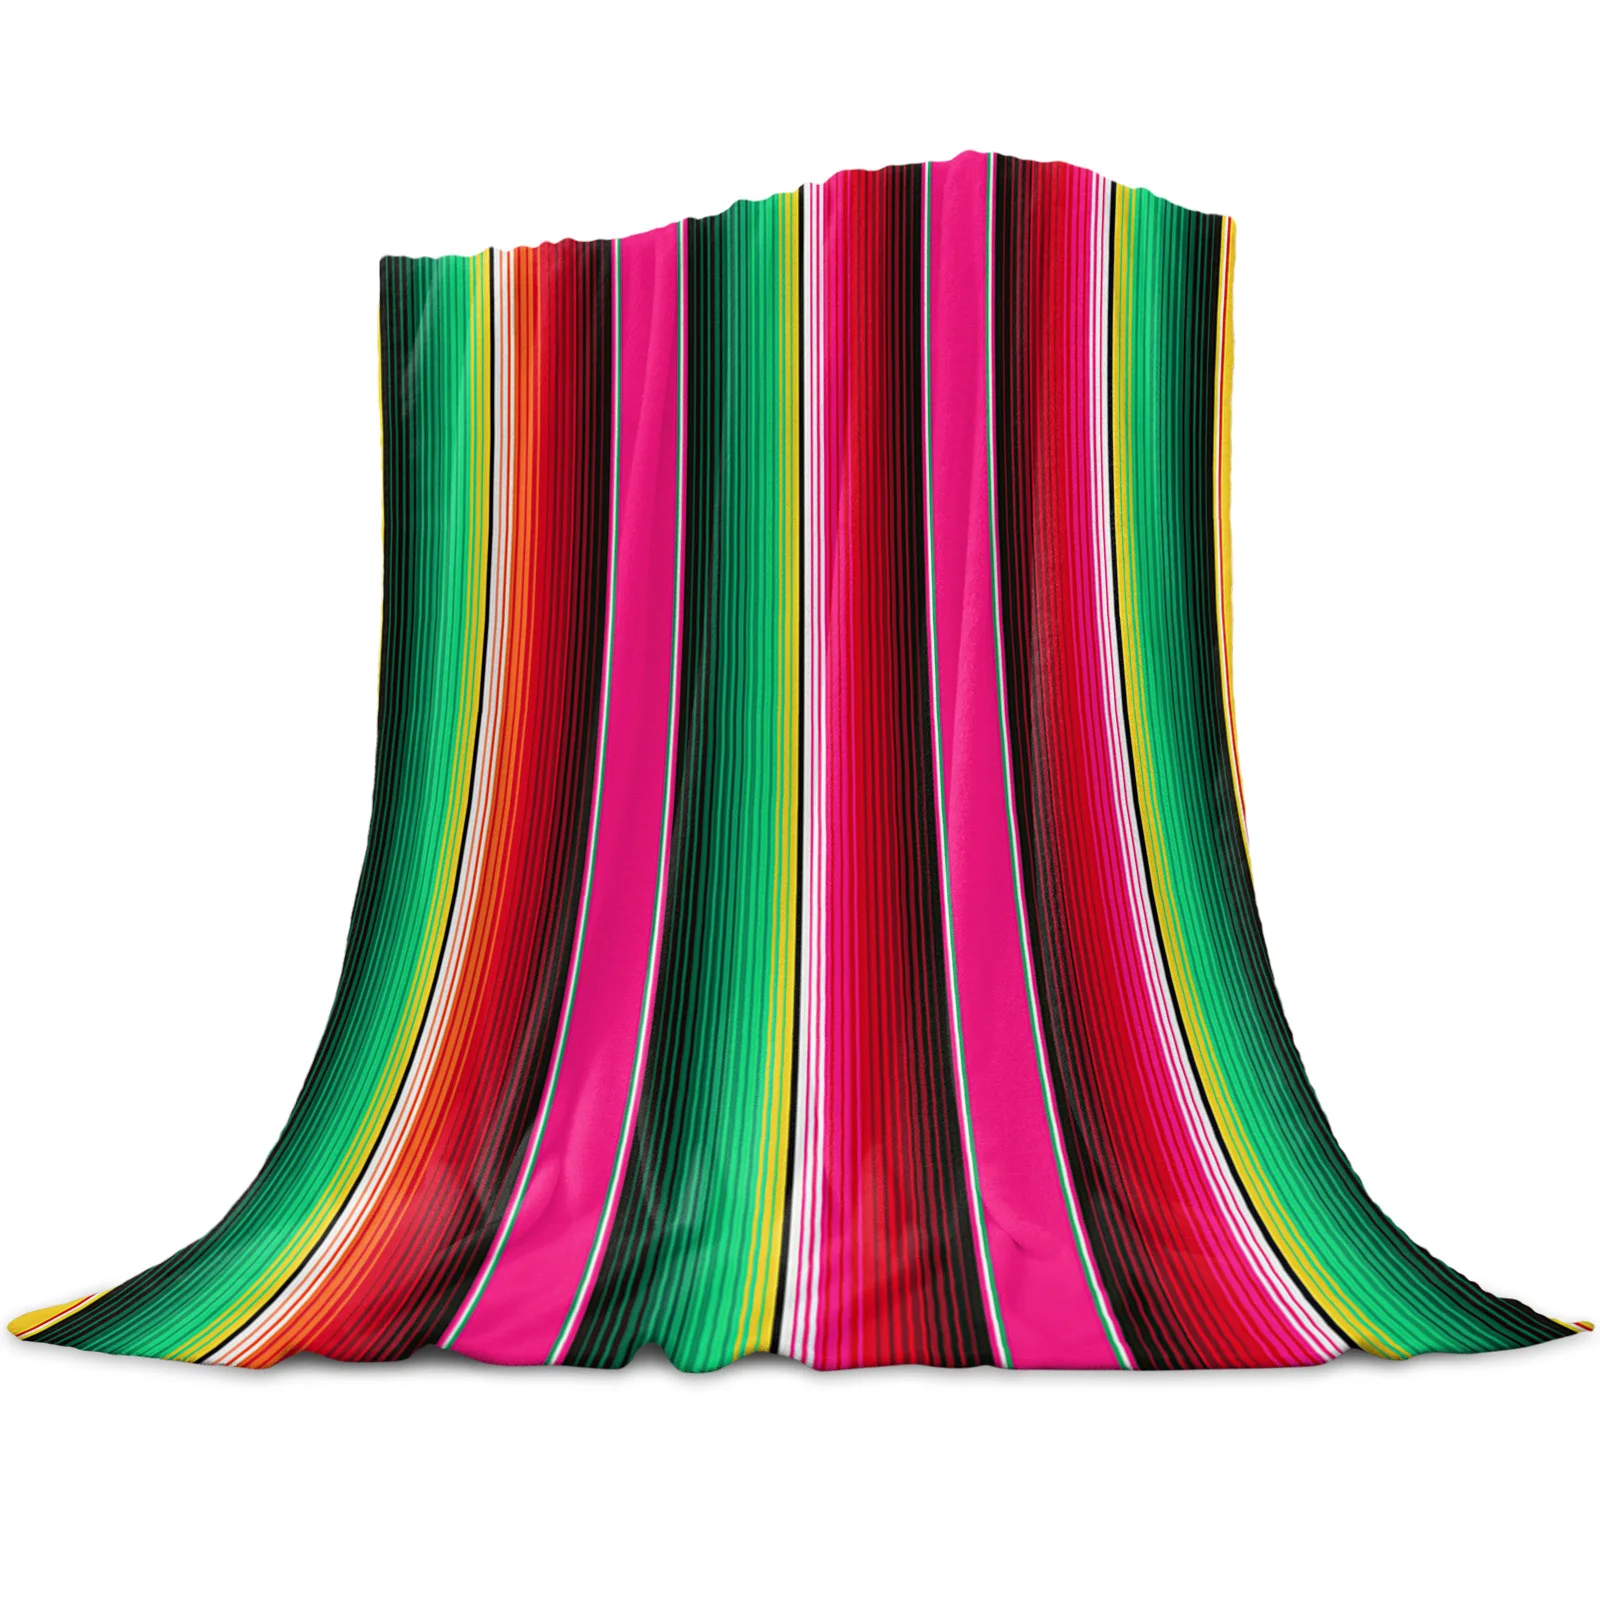 

Mexican Stripes Colorful Stripes Blanket Soft Warm Outdoor Travel Throw Blankets Adult Kids Winter TV Blankets Flannel Fleece